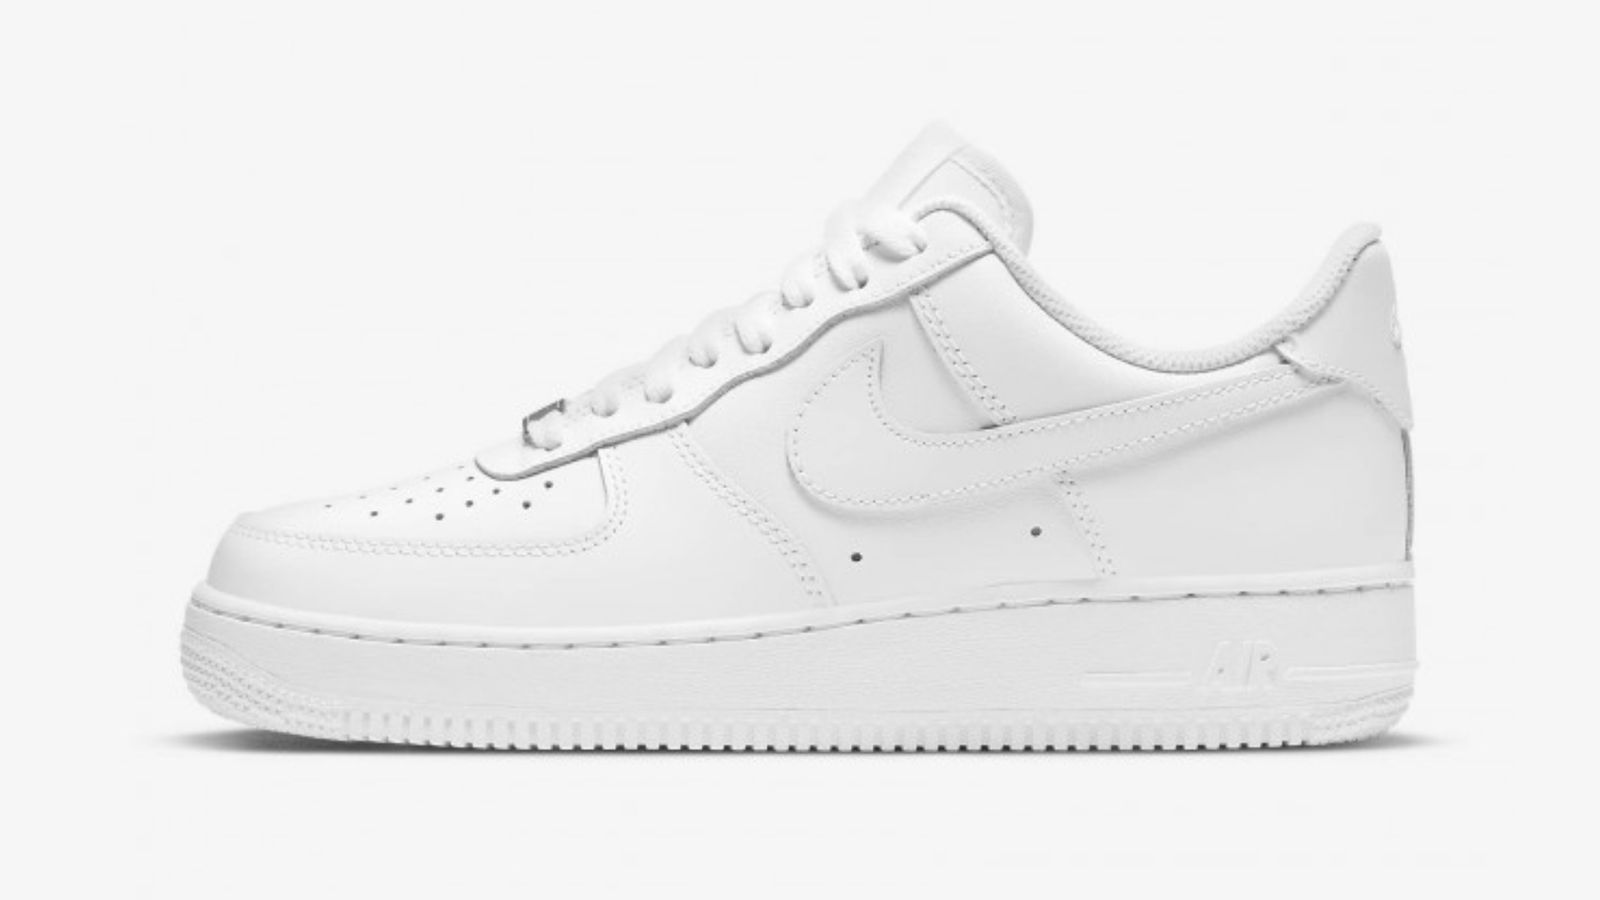 Air Force 1 vs Shadow: What's the difference?